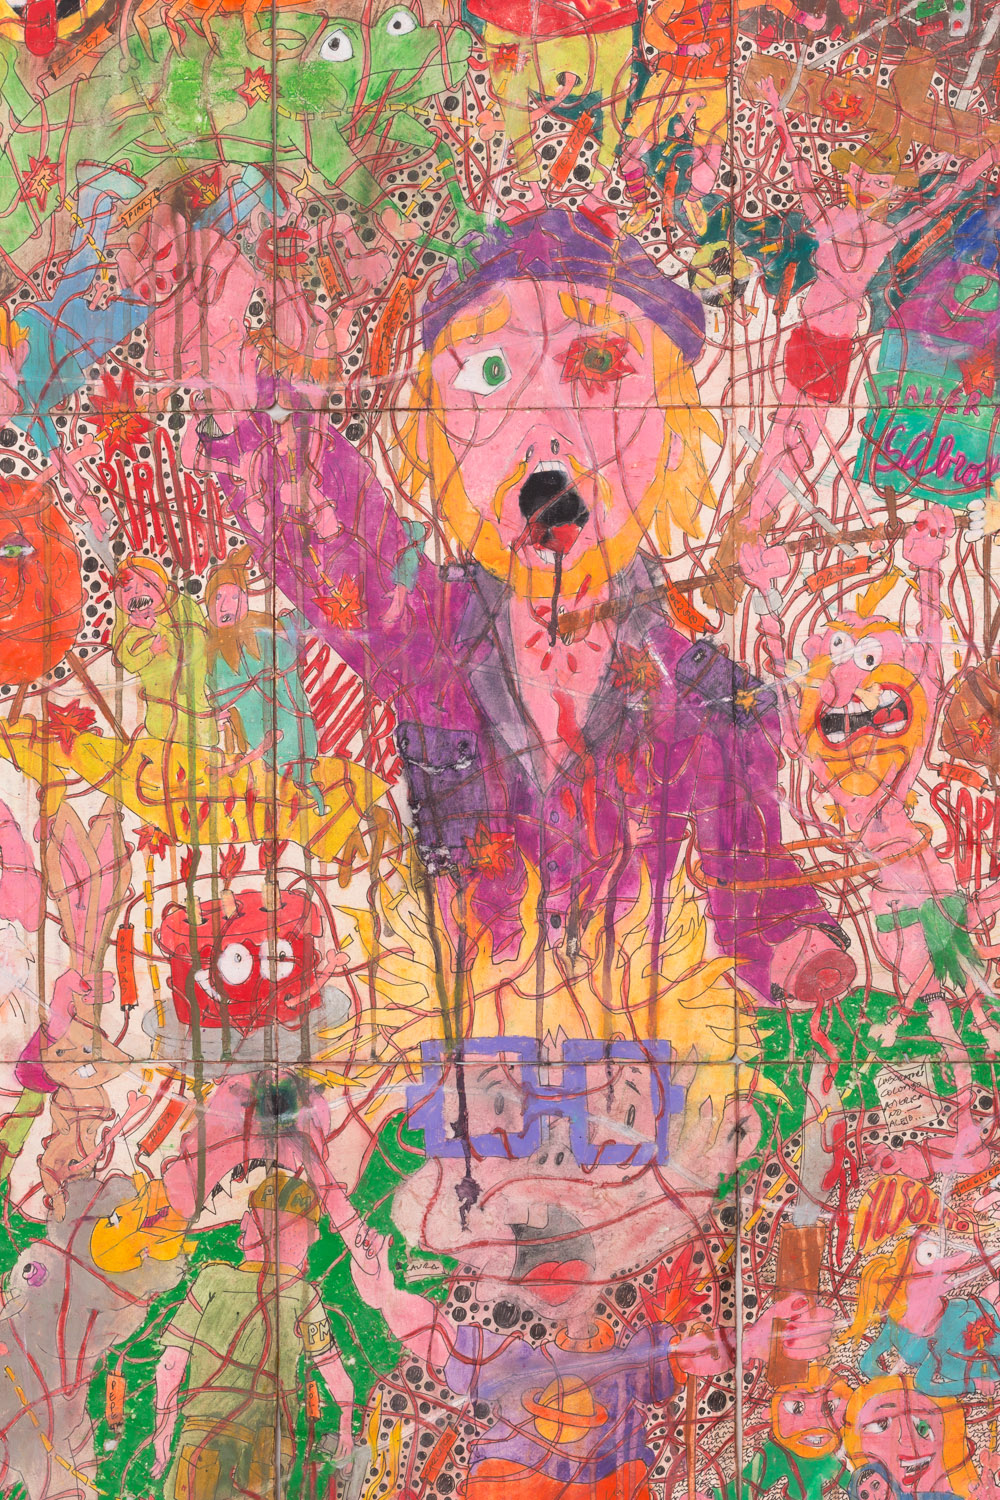 Camilo Restrepo. <em>A Land Reform 17, </em>2019. Ink, water-soluble wax pastel, tape, stickers, newspaper clippings, glue and saliva on paper, 46 3/4 x 115 3/4 inches (118.7 x 294 cm) Detail